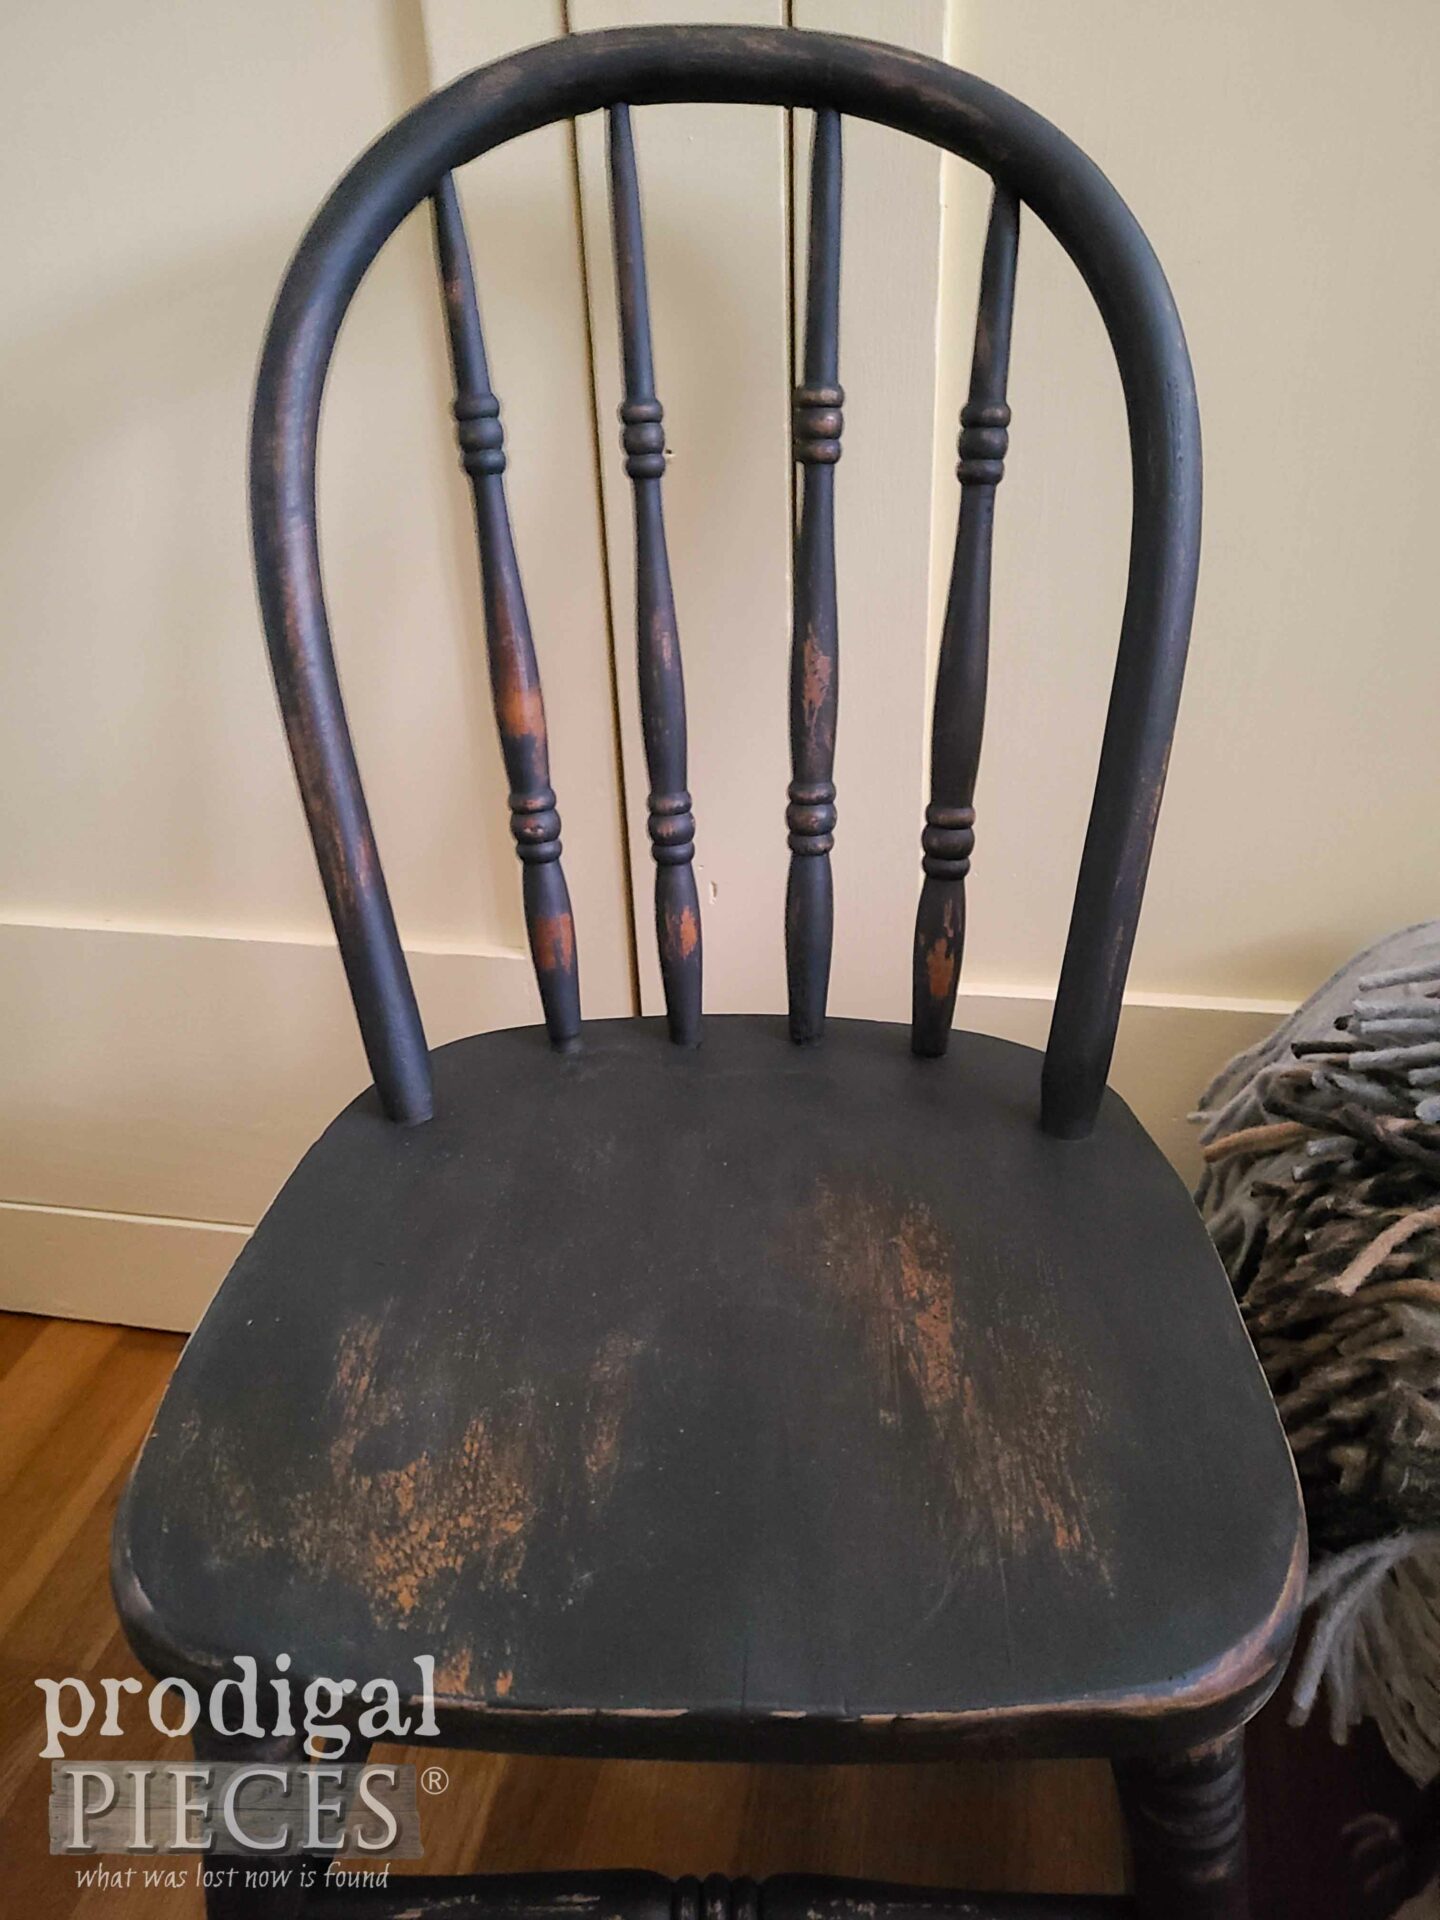 Wet Distressed Antique Child's Chairs by Prodigal Pieces | prodigalpieces.com #prodigalpieces #furntiure 